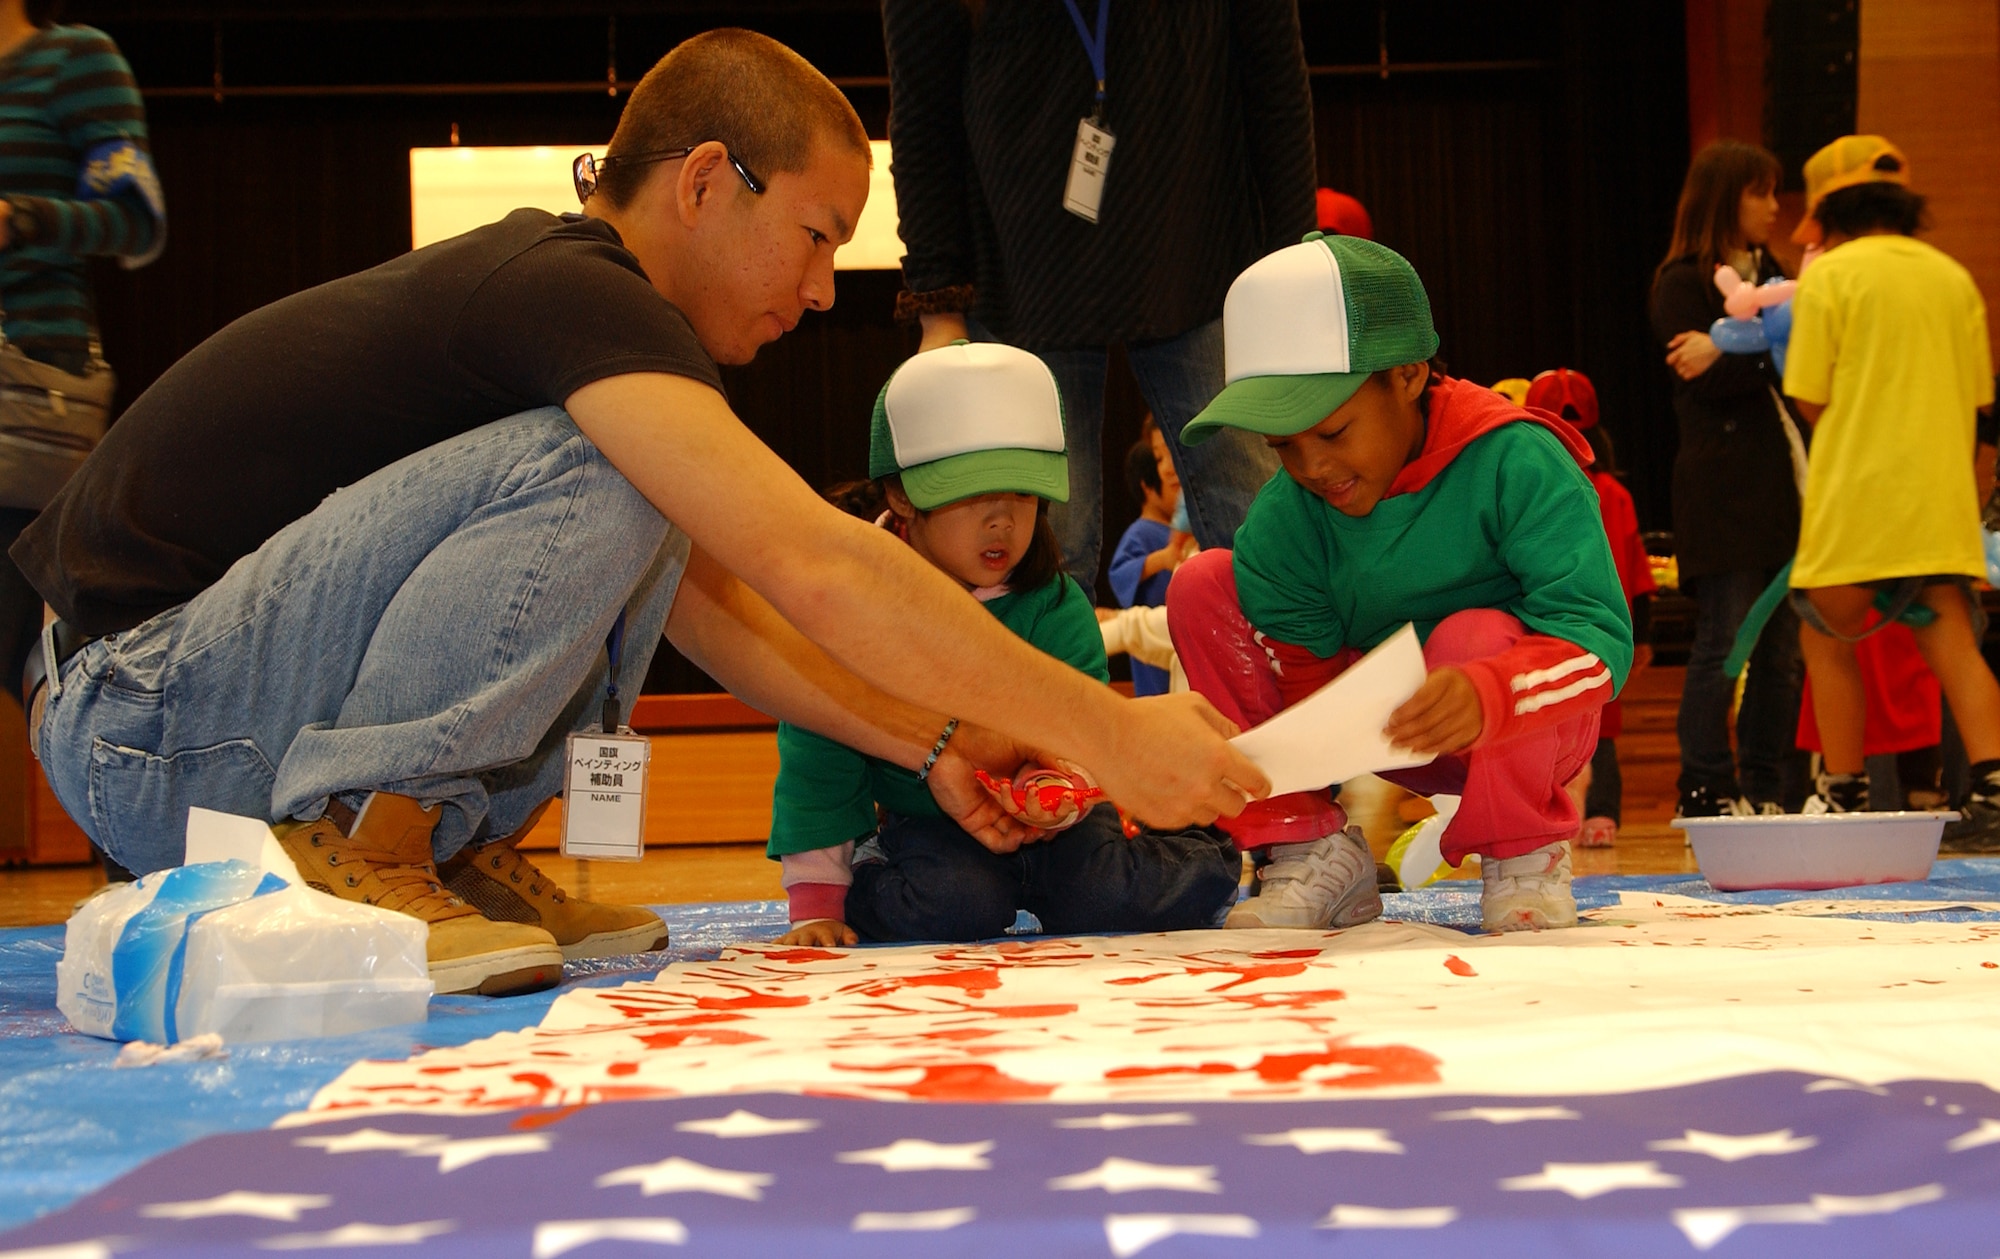 Children participate in an art exchange making hand prints on American and
Japanese flags during the U.S.-Japan Sports and Cultural Exchange at the
Rotary Plaza in Okinawa, Japan, March 14.  (U.S. Air Force photo/Tech. Sgt.
Rey Ramon)  